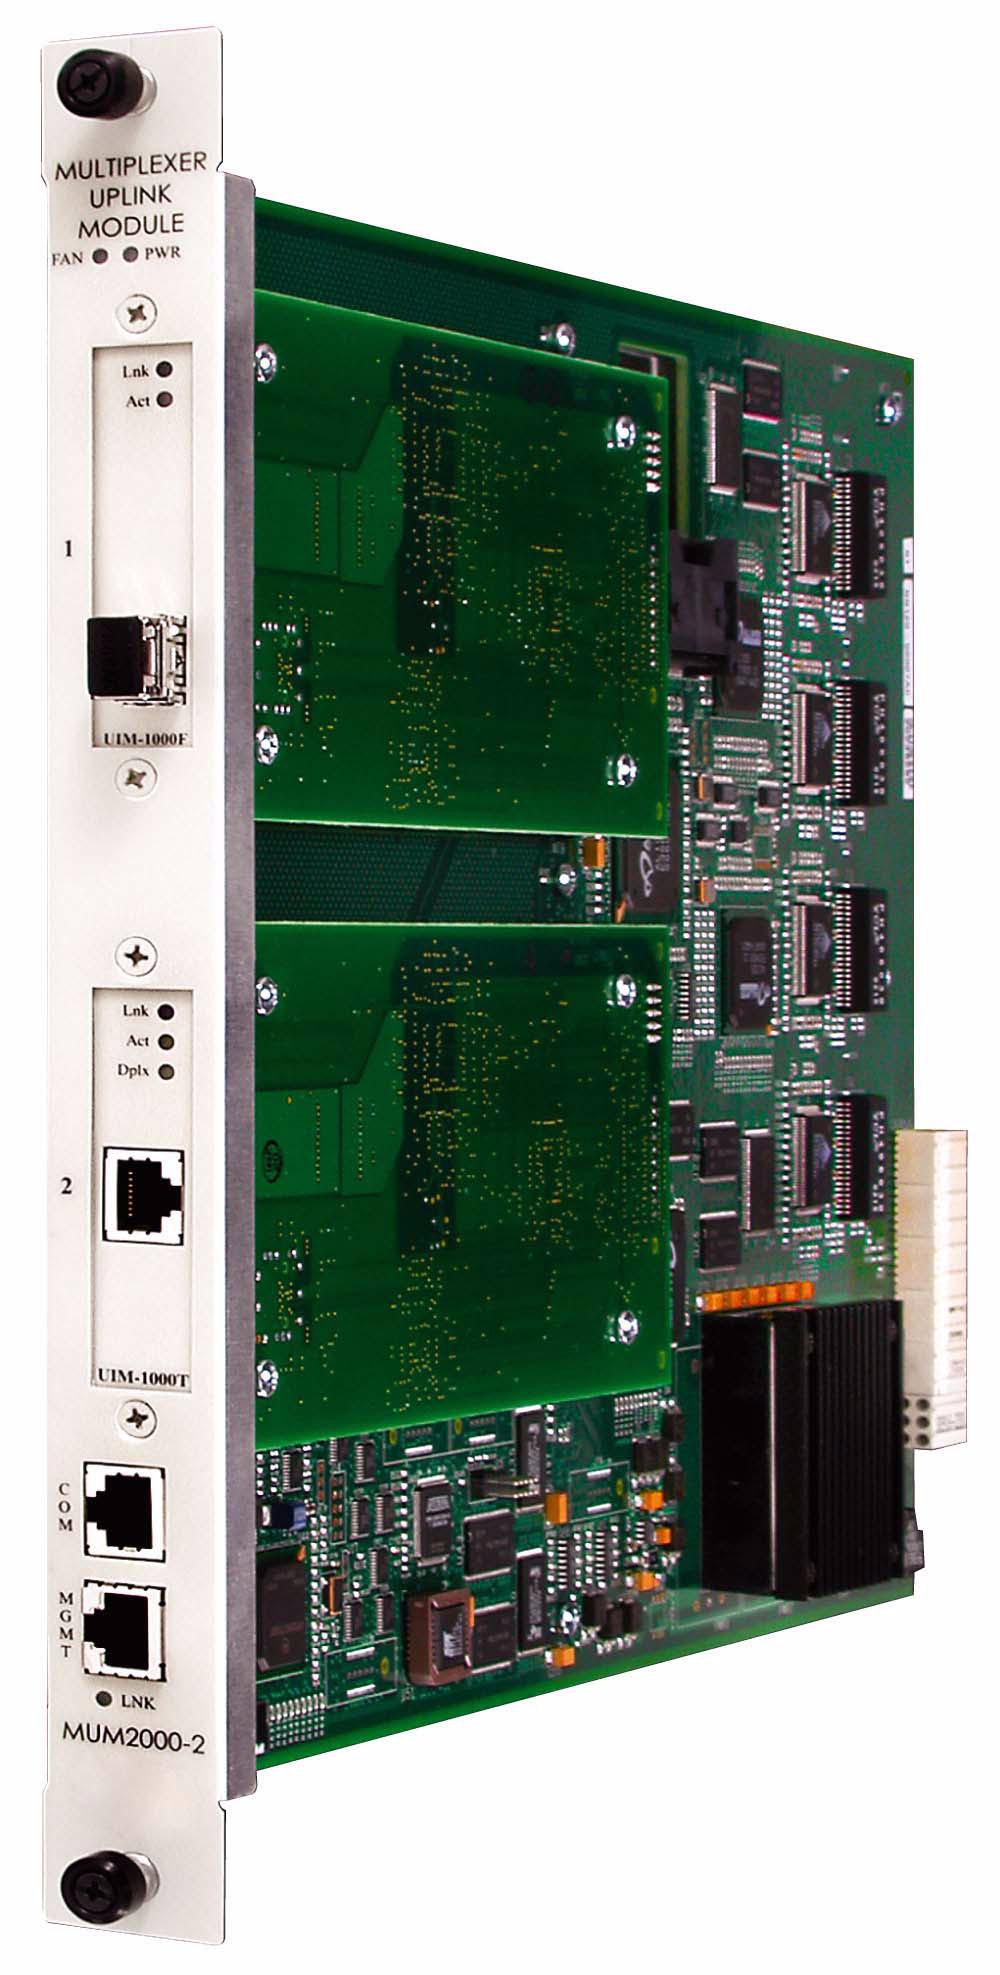 Installing an Uplink Interface Module On the MUM2000-2 A Uplink Interface Module (UIM) provides the upstream network connection for the BAC. Neither a BAC nor a MUM2000-2 can function without a UIM.